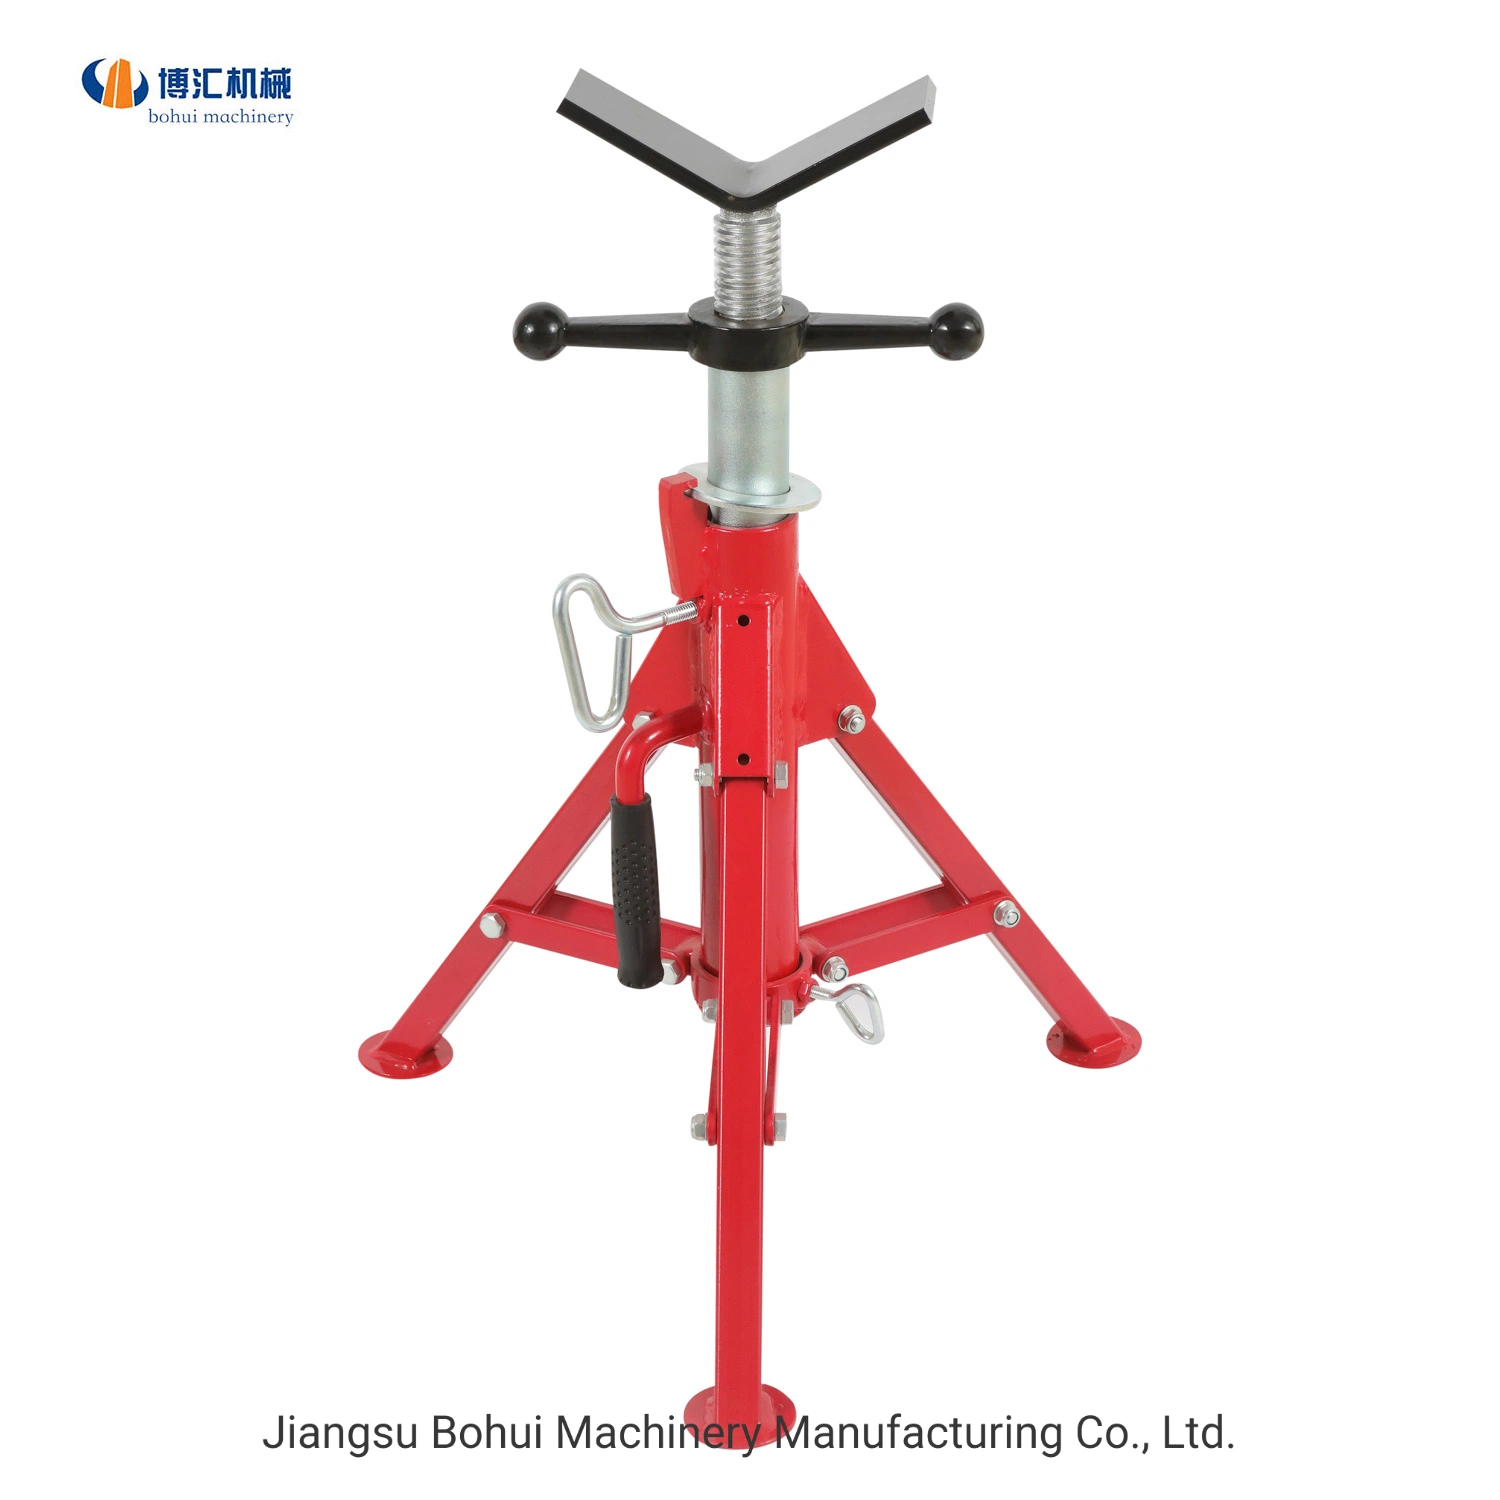 V-Head Pipe Stand with 1133kg Loading Weight